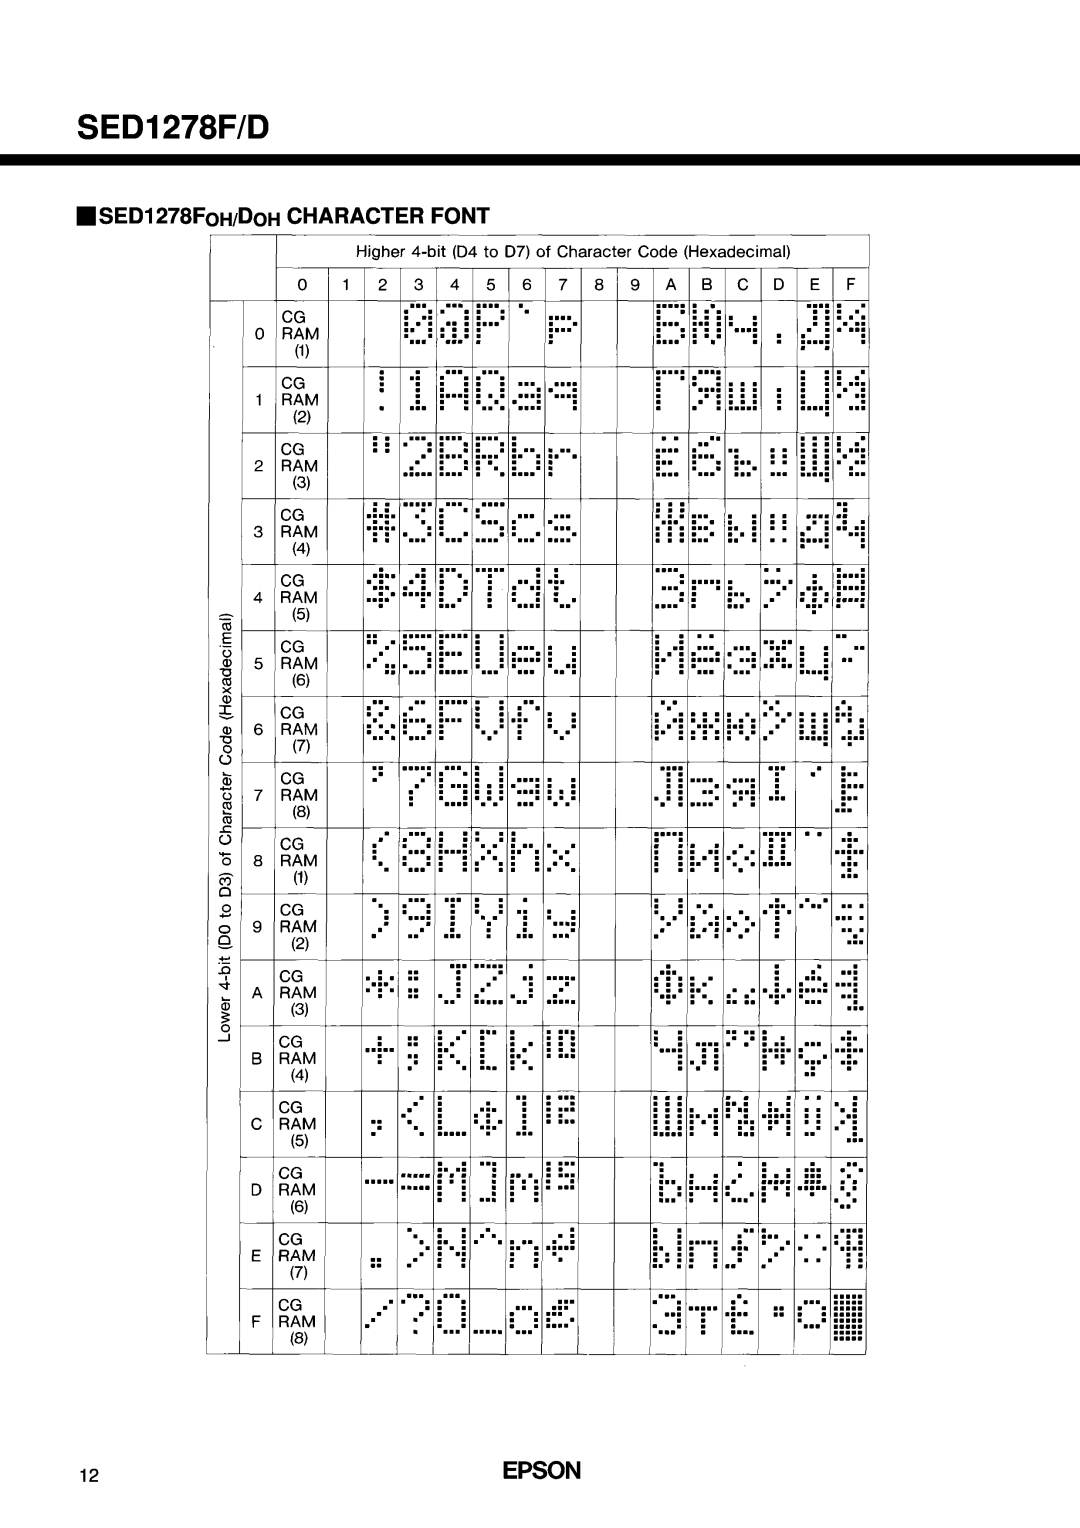 Epson SED1278F/D manual SED1278FOH/DOH CHARACTER FONT 